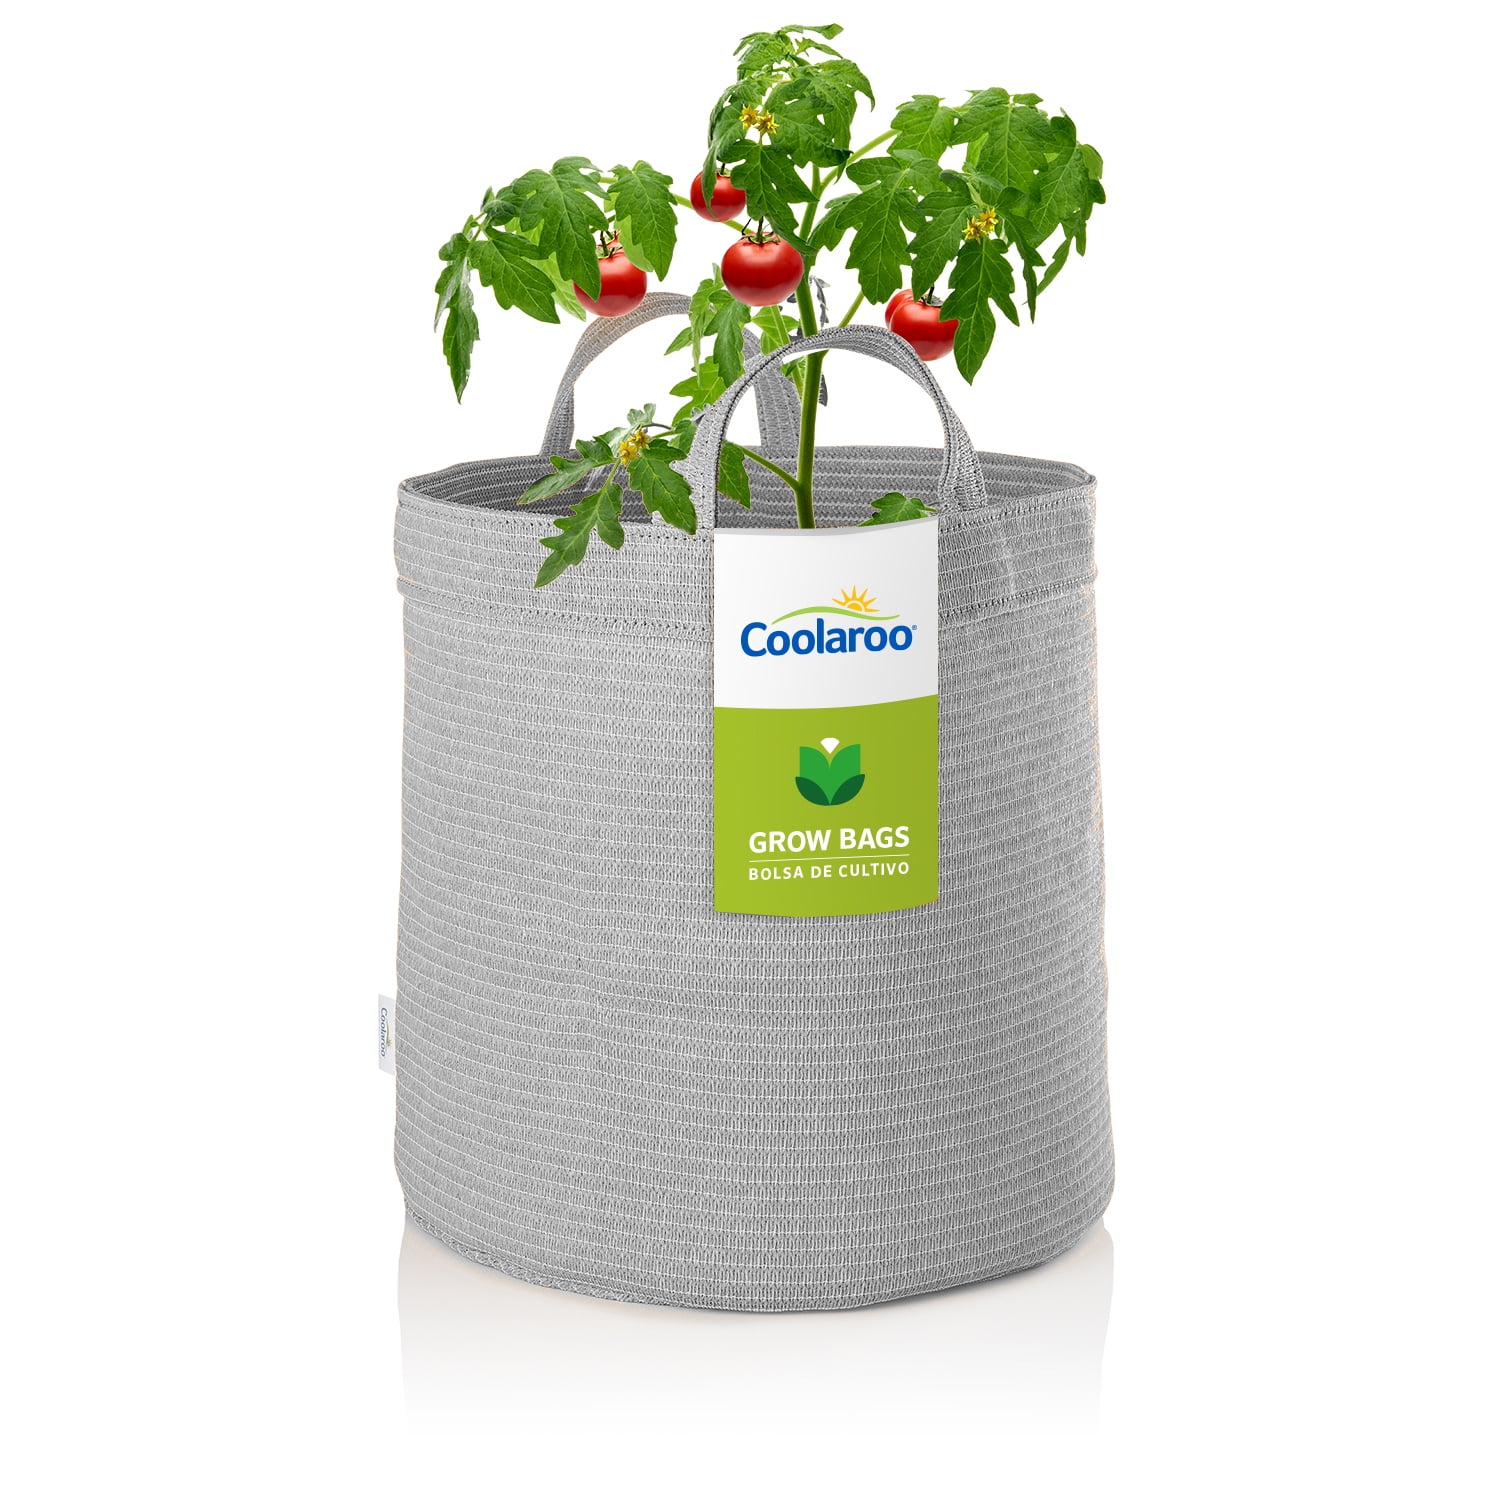 Coolaroo 10 Gallon Round Fabric Grow Bag with Drainage Holes, UV Resistant  and Durable Handles - 1 Pack, Steel Grey 